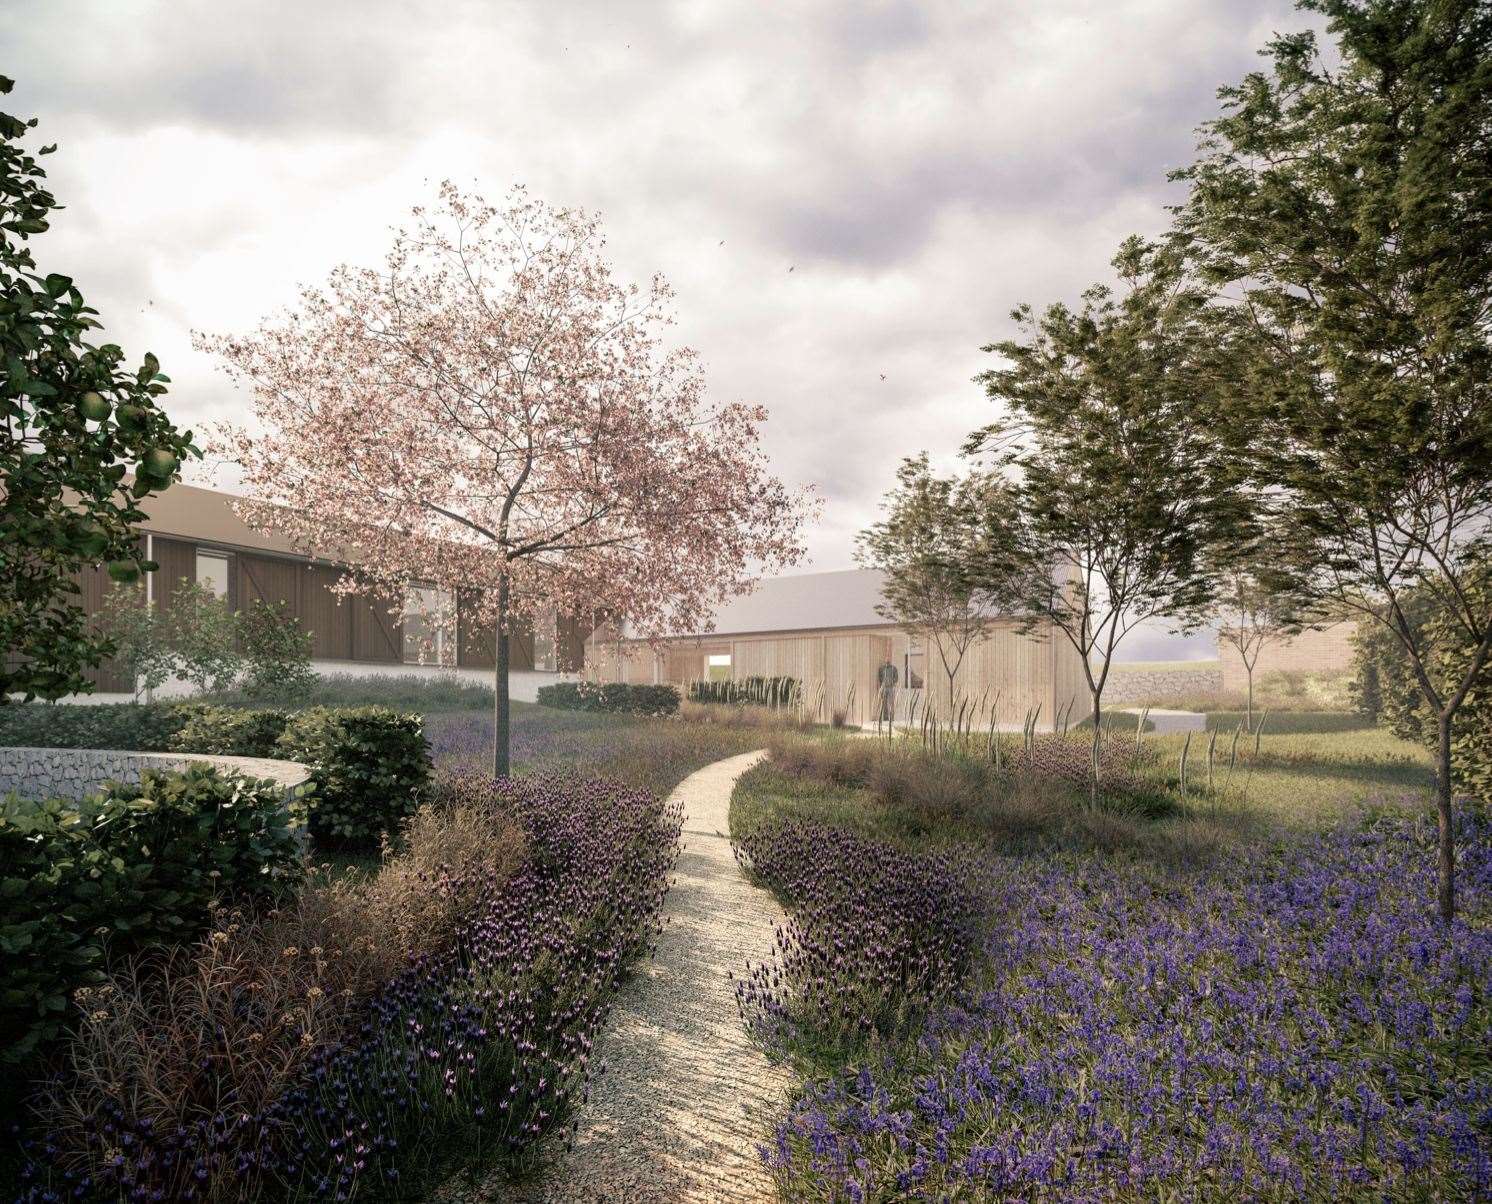 The farm is hoping to diversify its operations. Picture: TaylorHare Architects